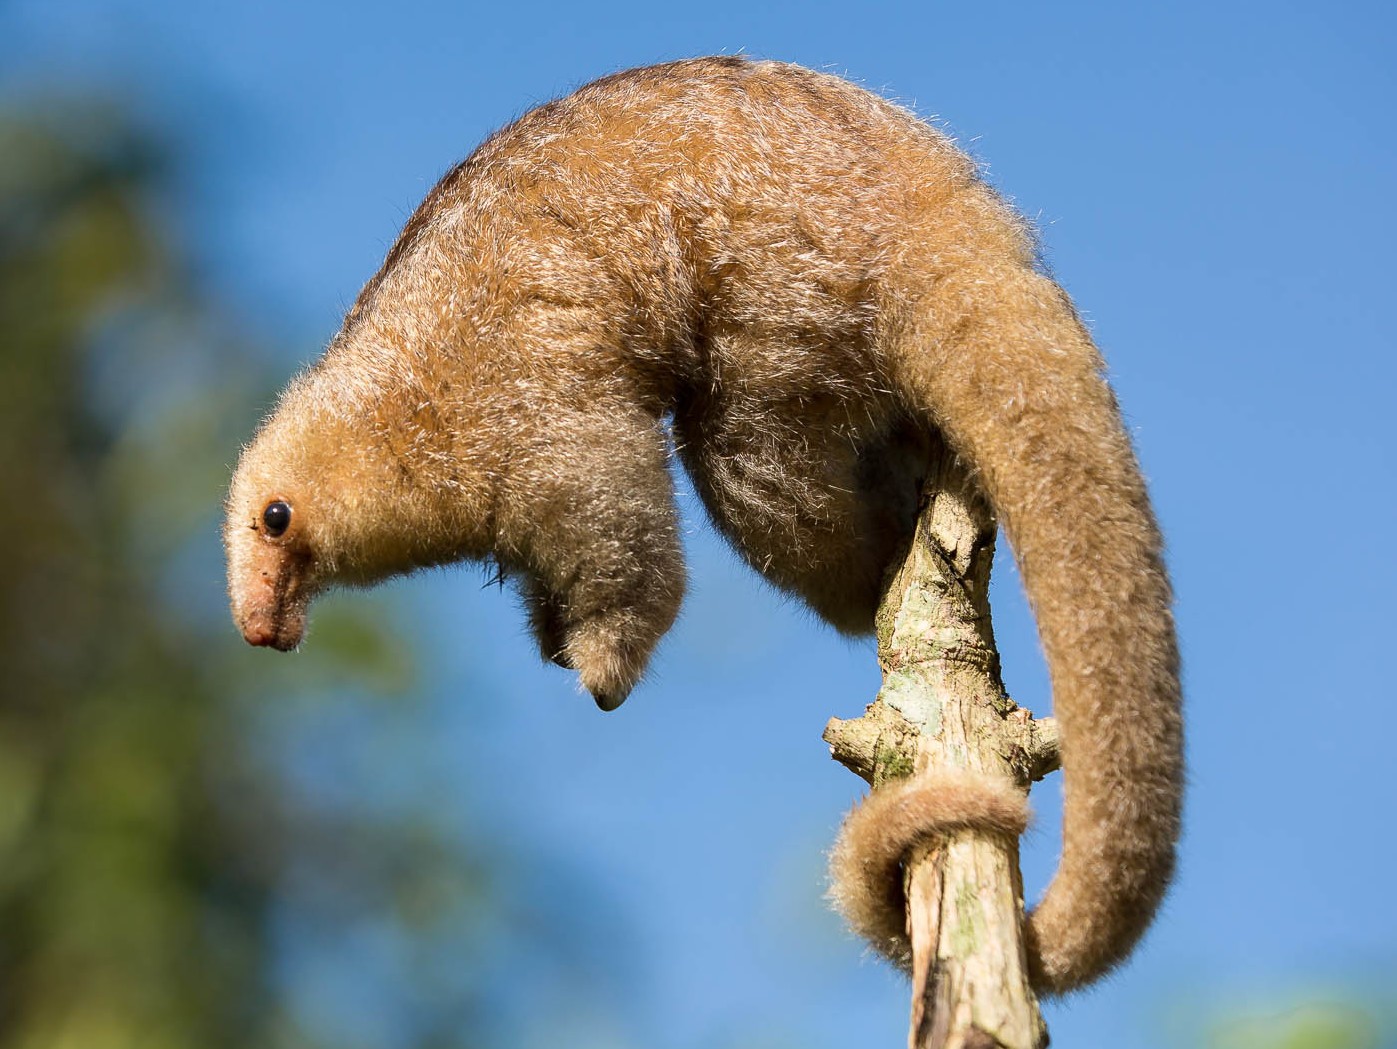 Pygmy anteaters (Cyclopes)